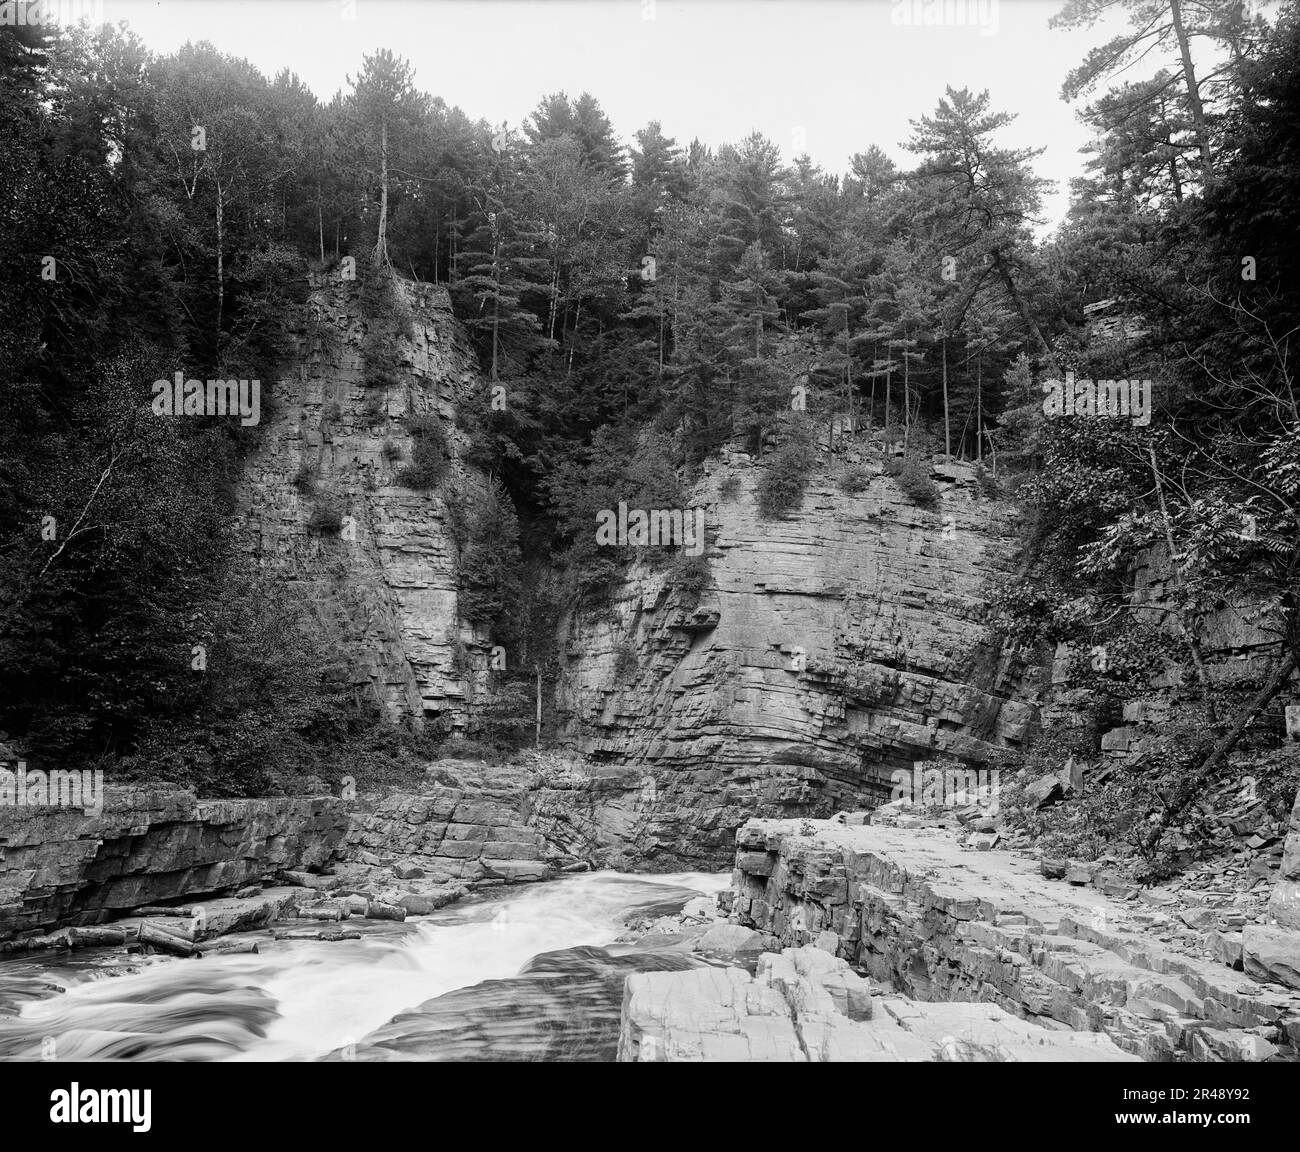 The Elbow, Ausable Chasm, between 1900 and 1910. Stock Photo